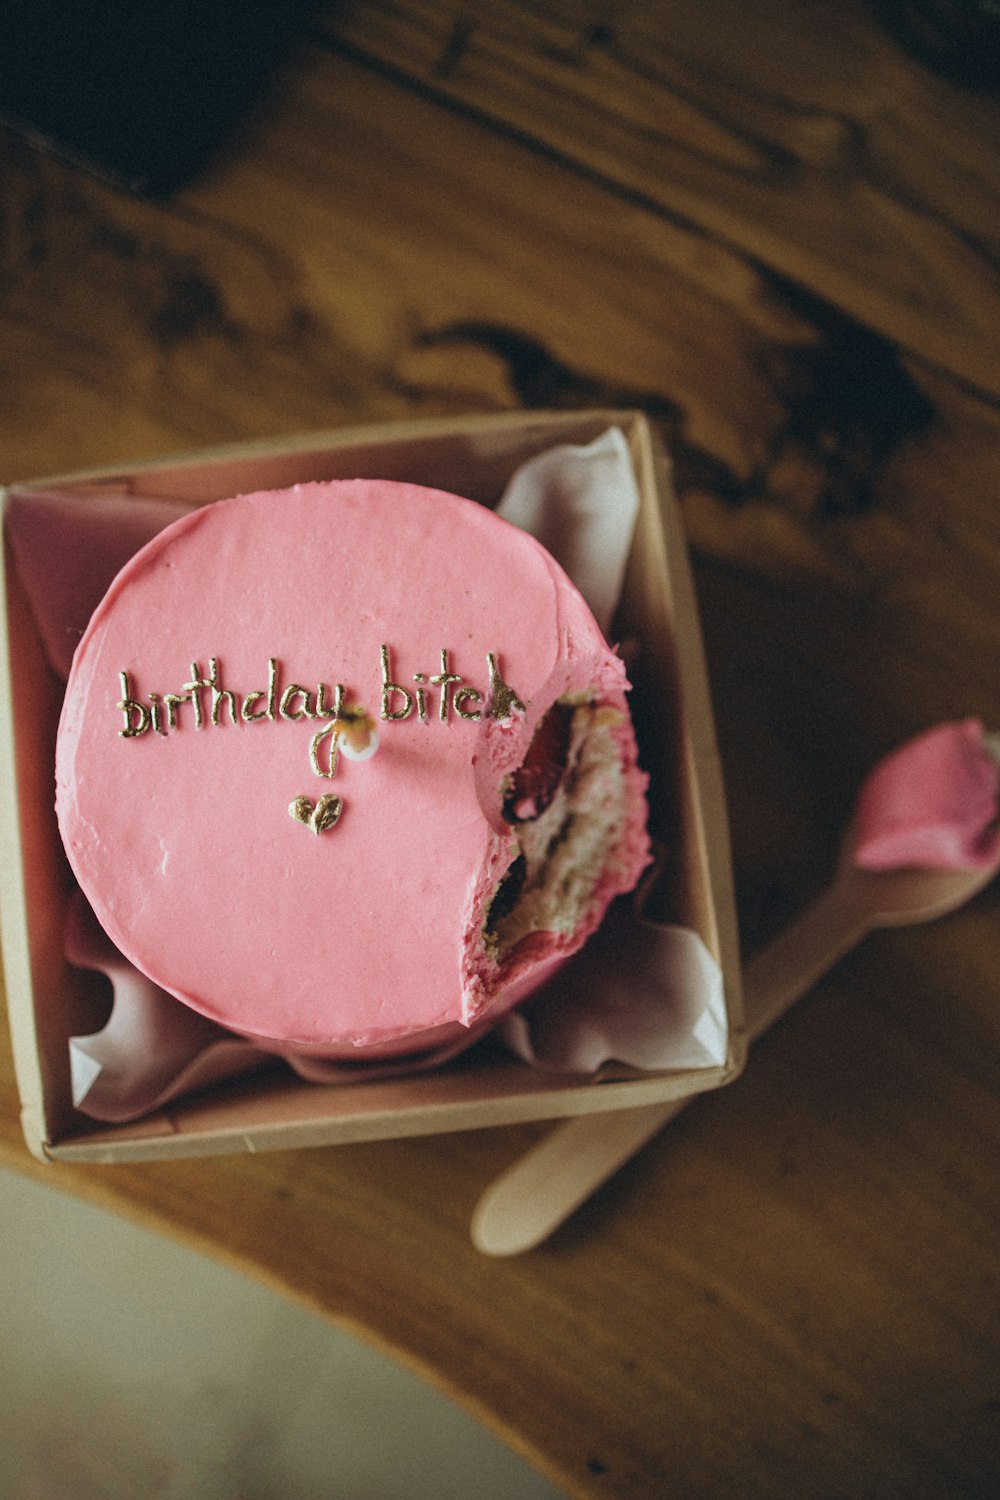 a pink birthday cake in a pink box